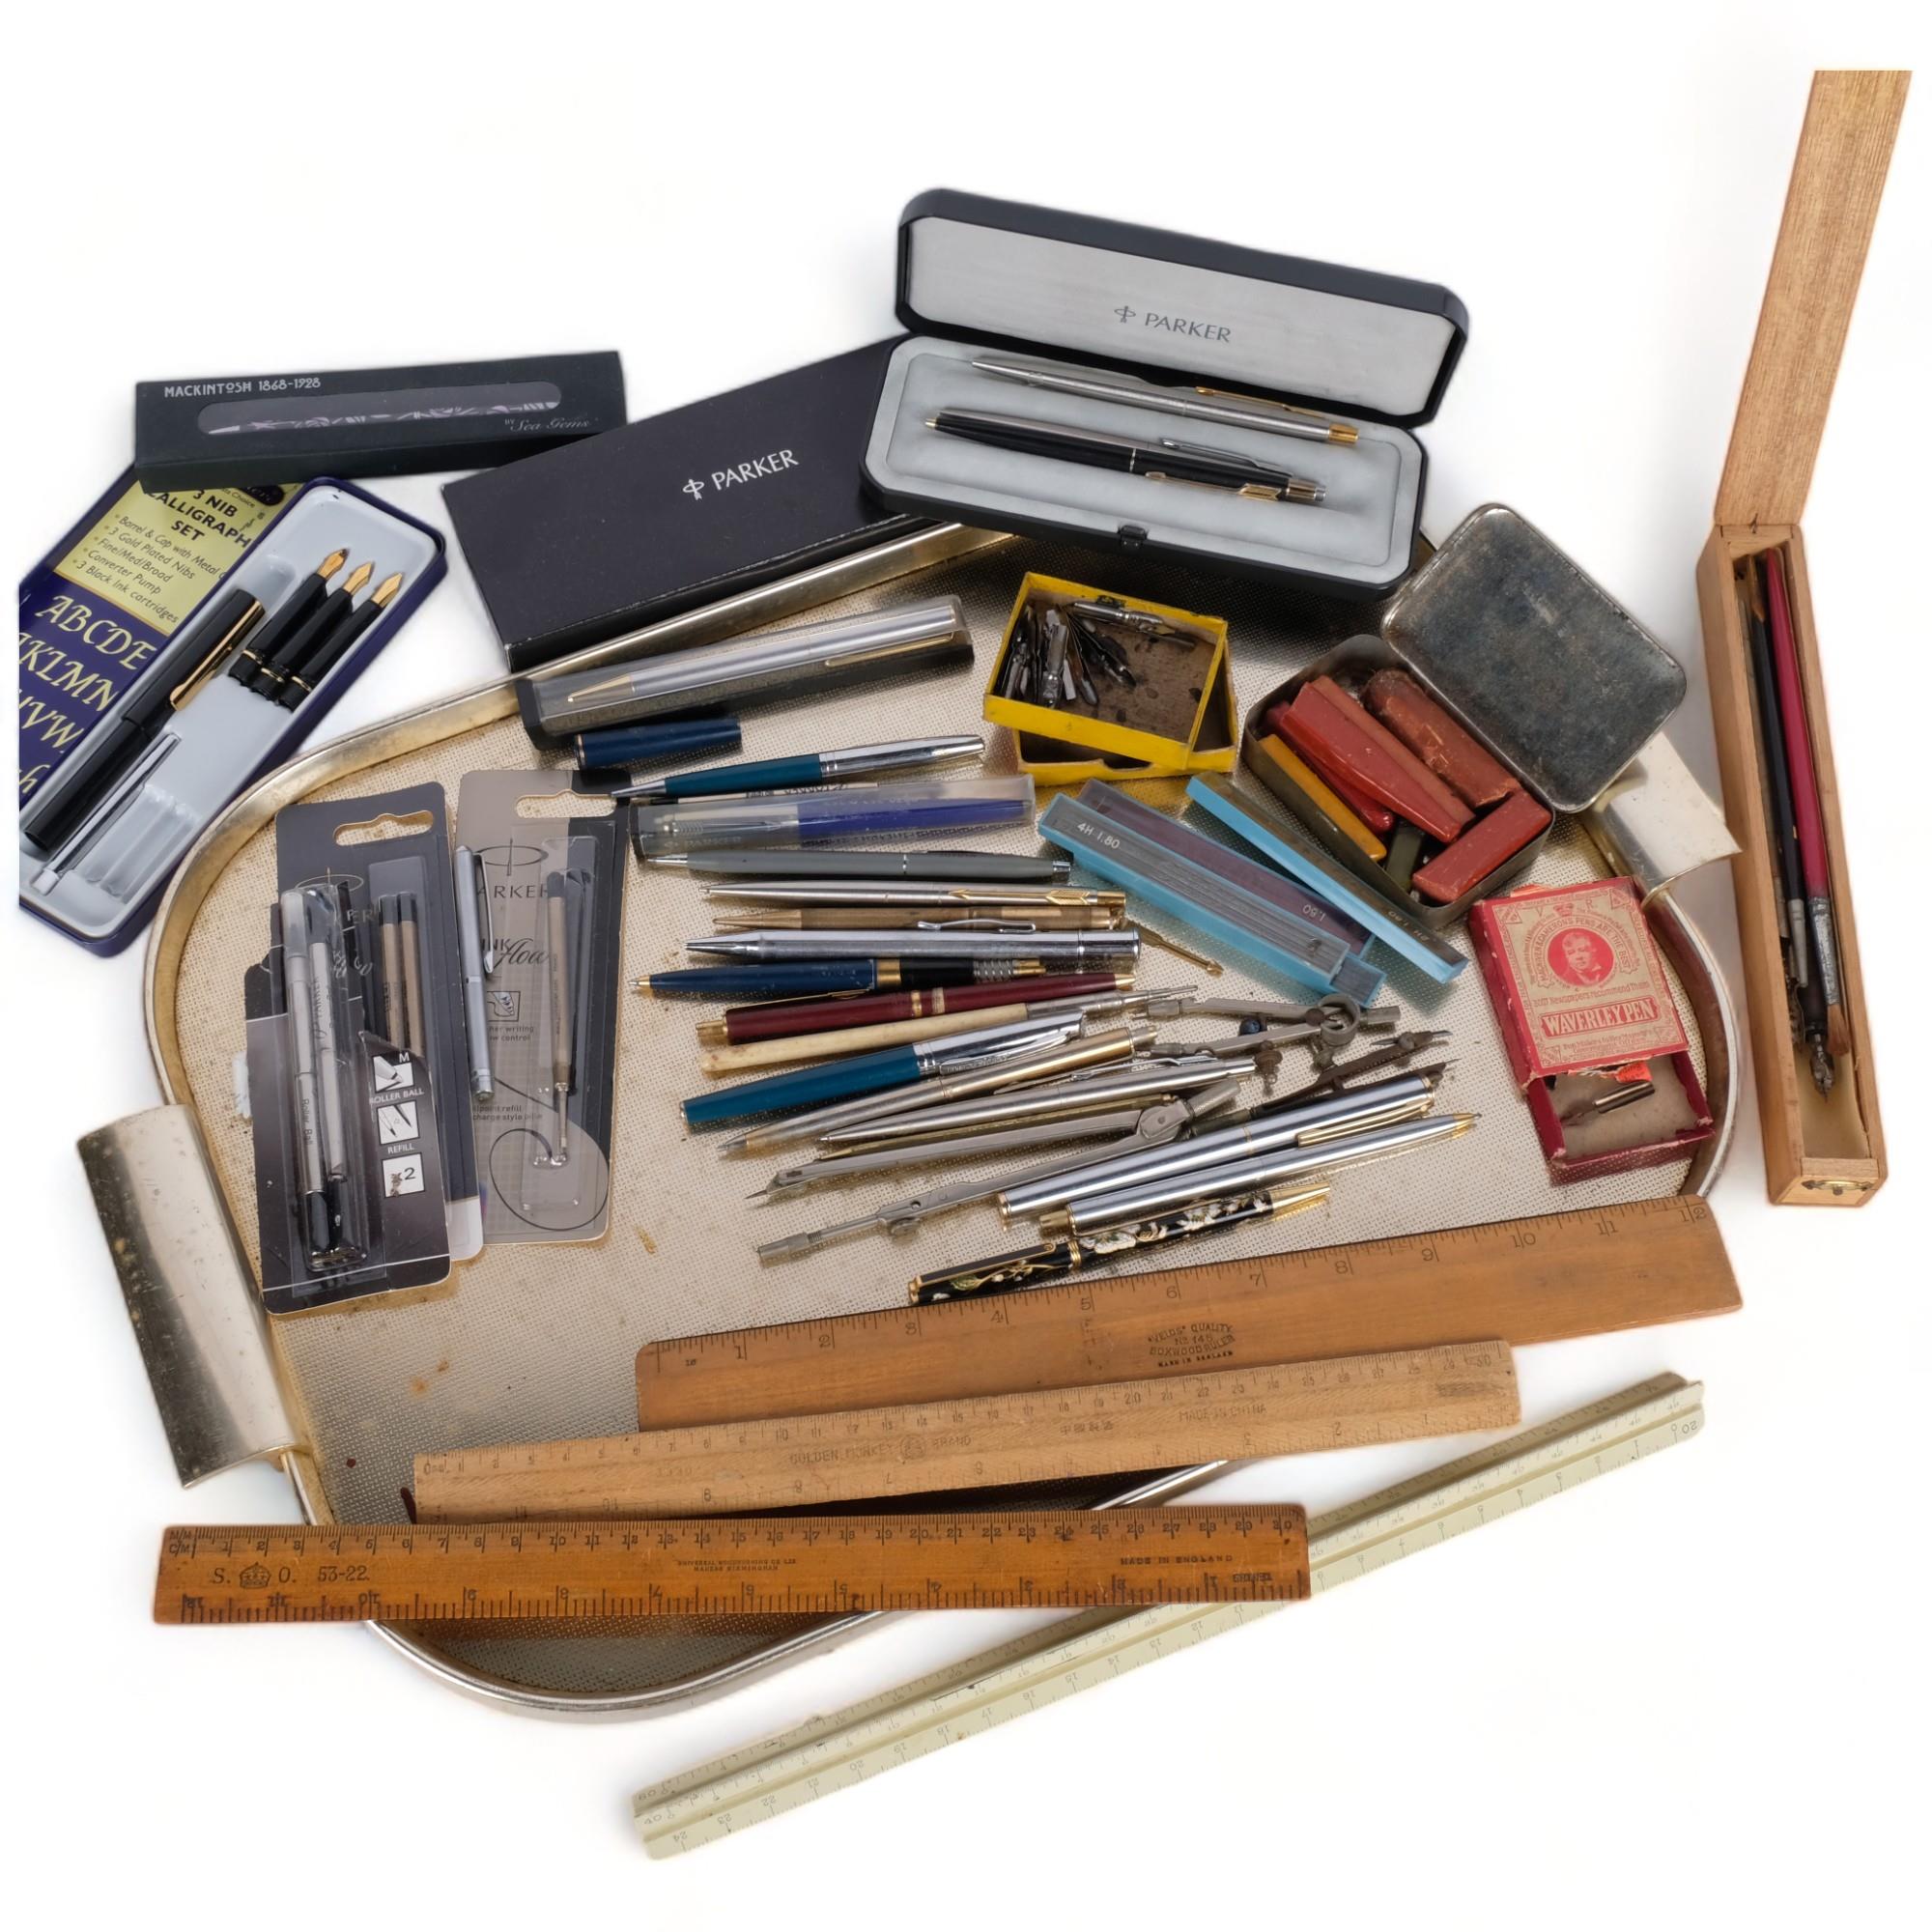 Fountain pens, ballpoint pens, drawing instruments, etc